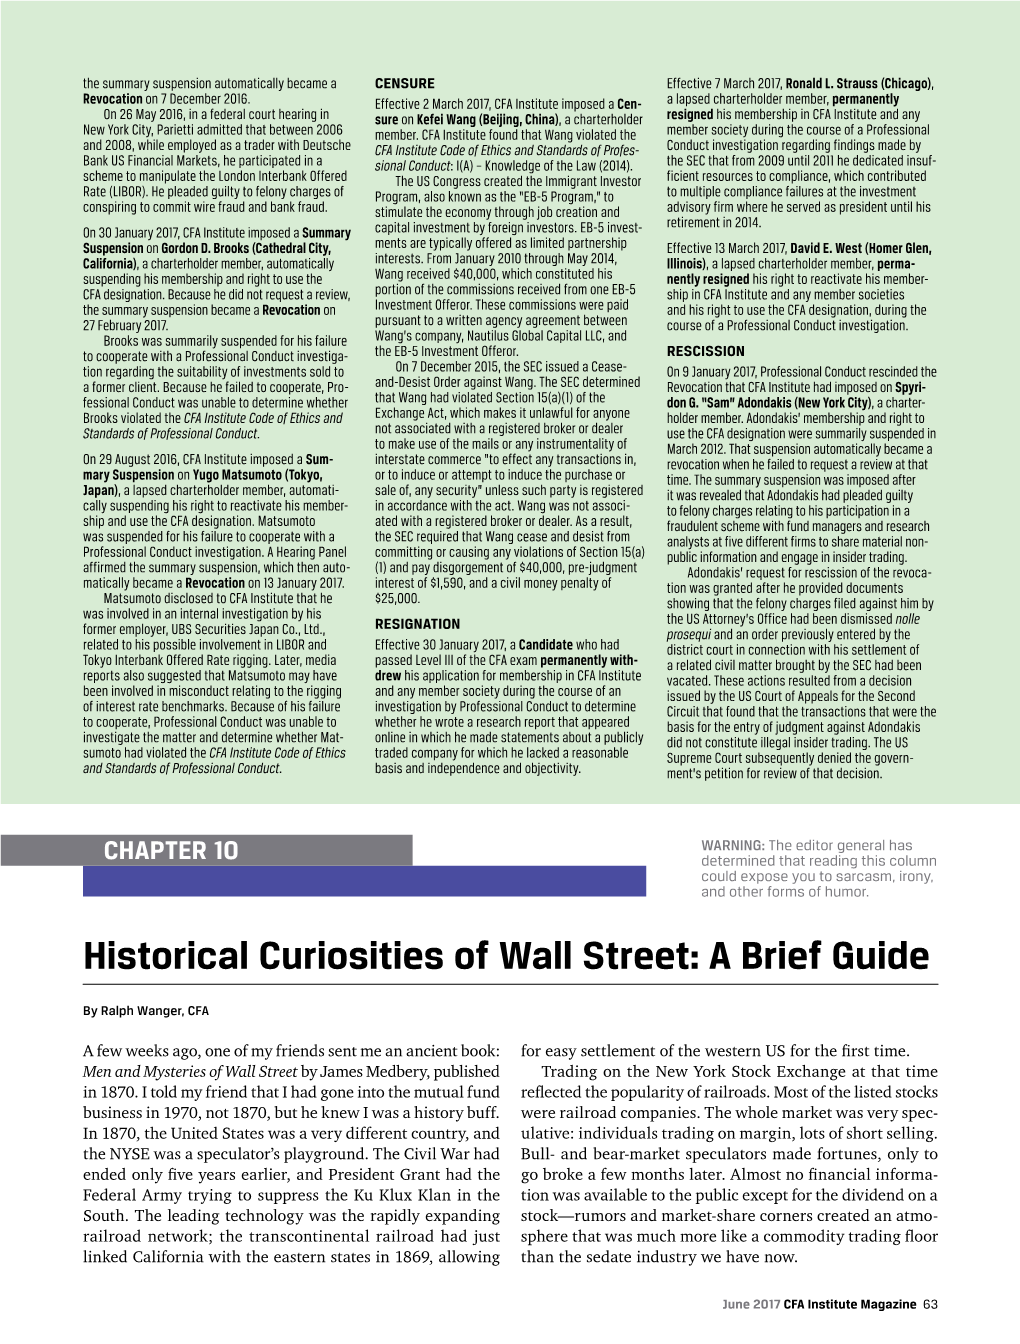 Historical Curiosities of Wall Street: a Brief Guide